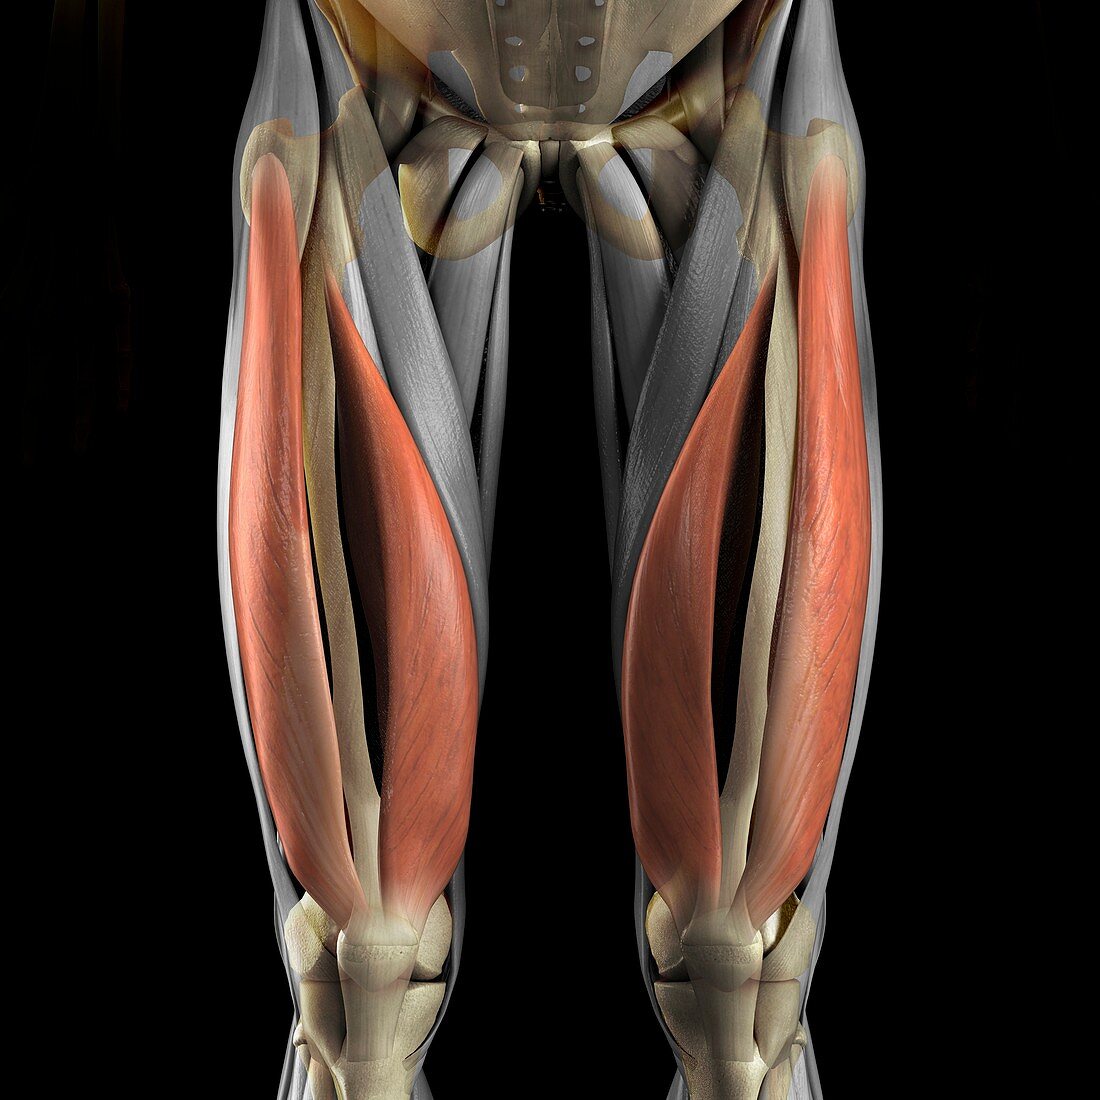 Vastus Medialis and Lateralis Muscles